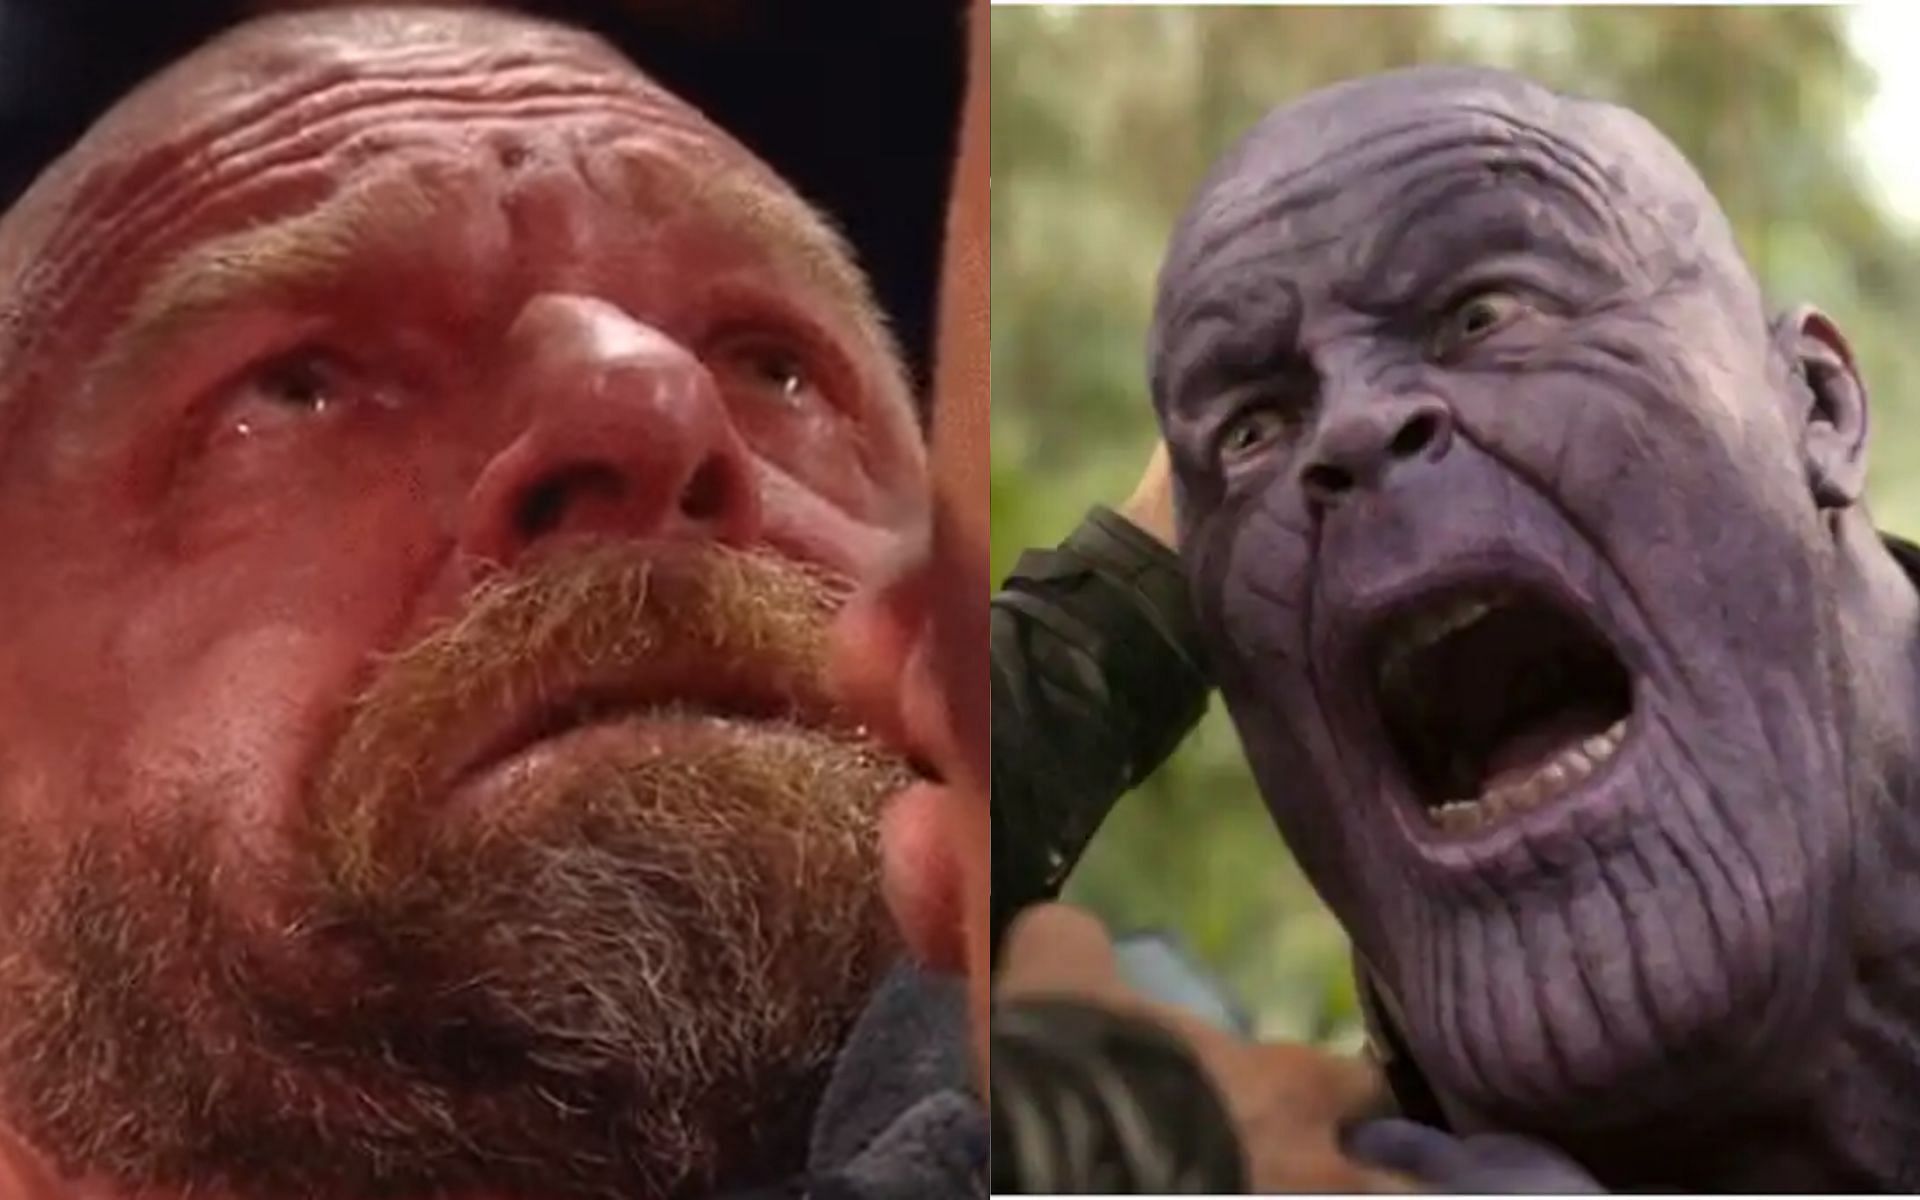 WWE Superstars portray amazing villains on screen - sometimes even comparable to Marvel villains